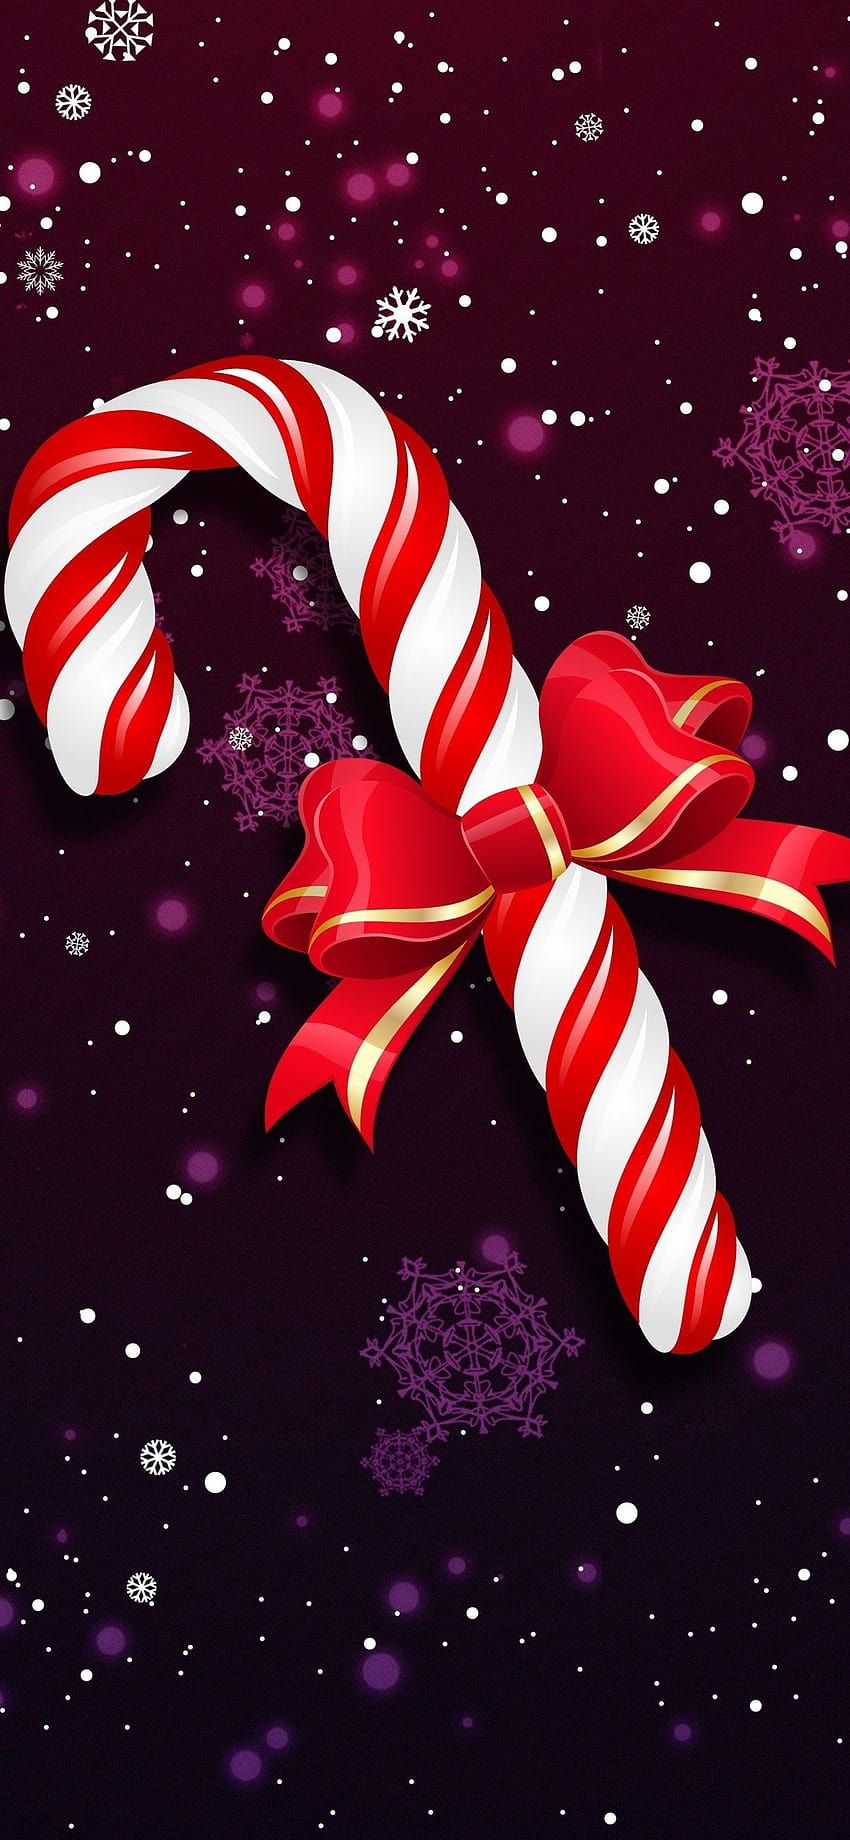 A candy cane with a red bow on a purple background with snowflakes. - Candy cane